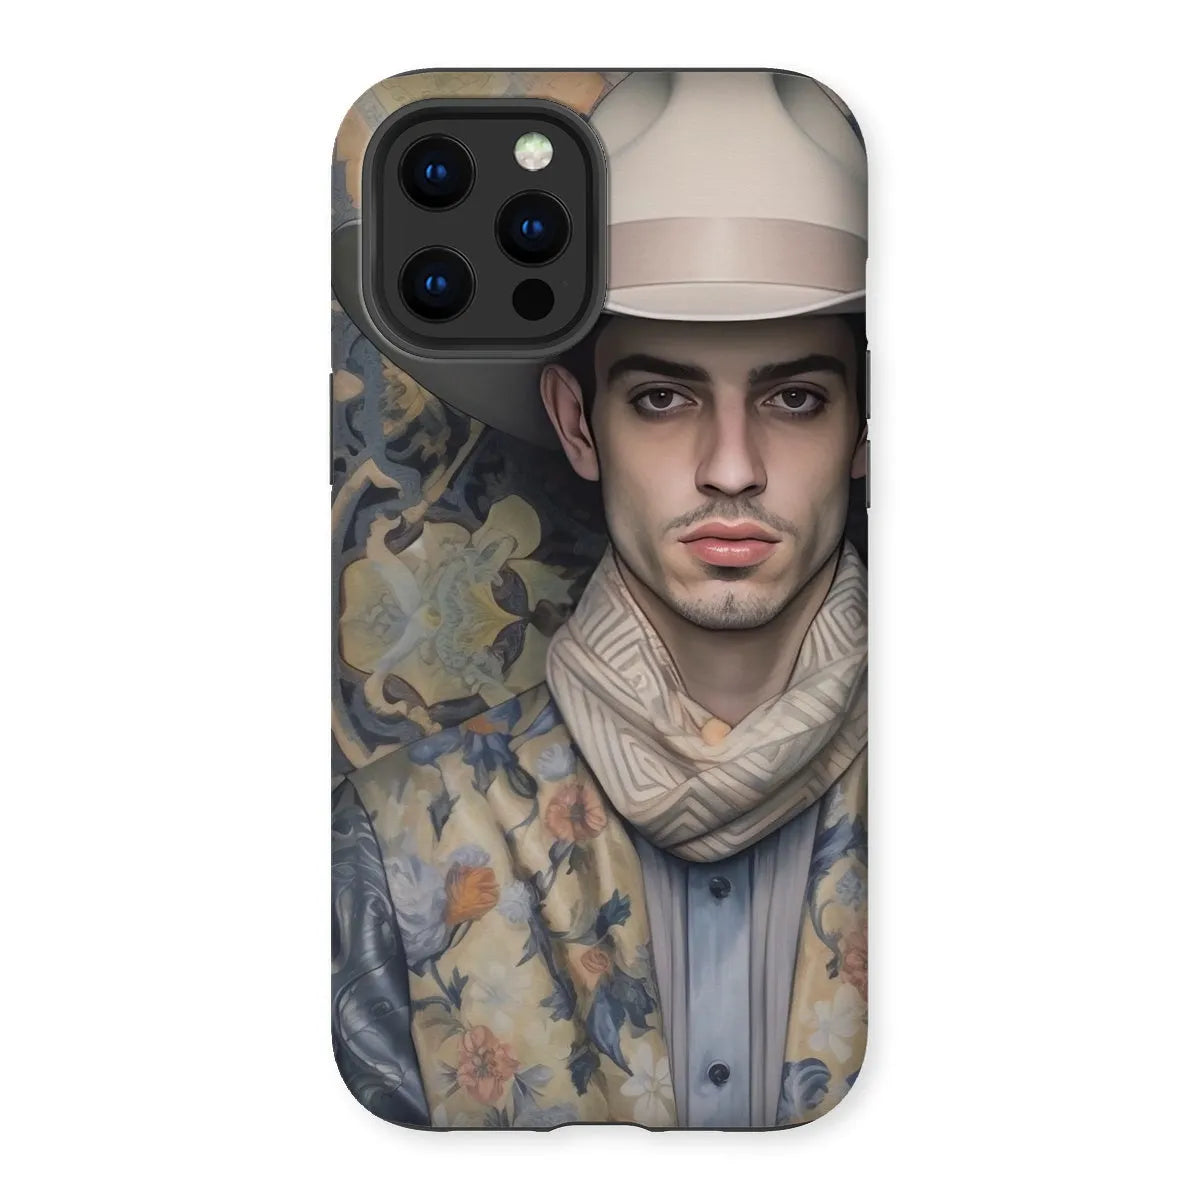 Farzad The Gay Cowboy - Dandy Gay Men Art Phone Case - Iphone 12 Pro Max / Matte - Mobile Phone Cases - Aesthetic Art